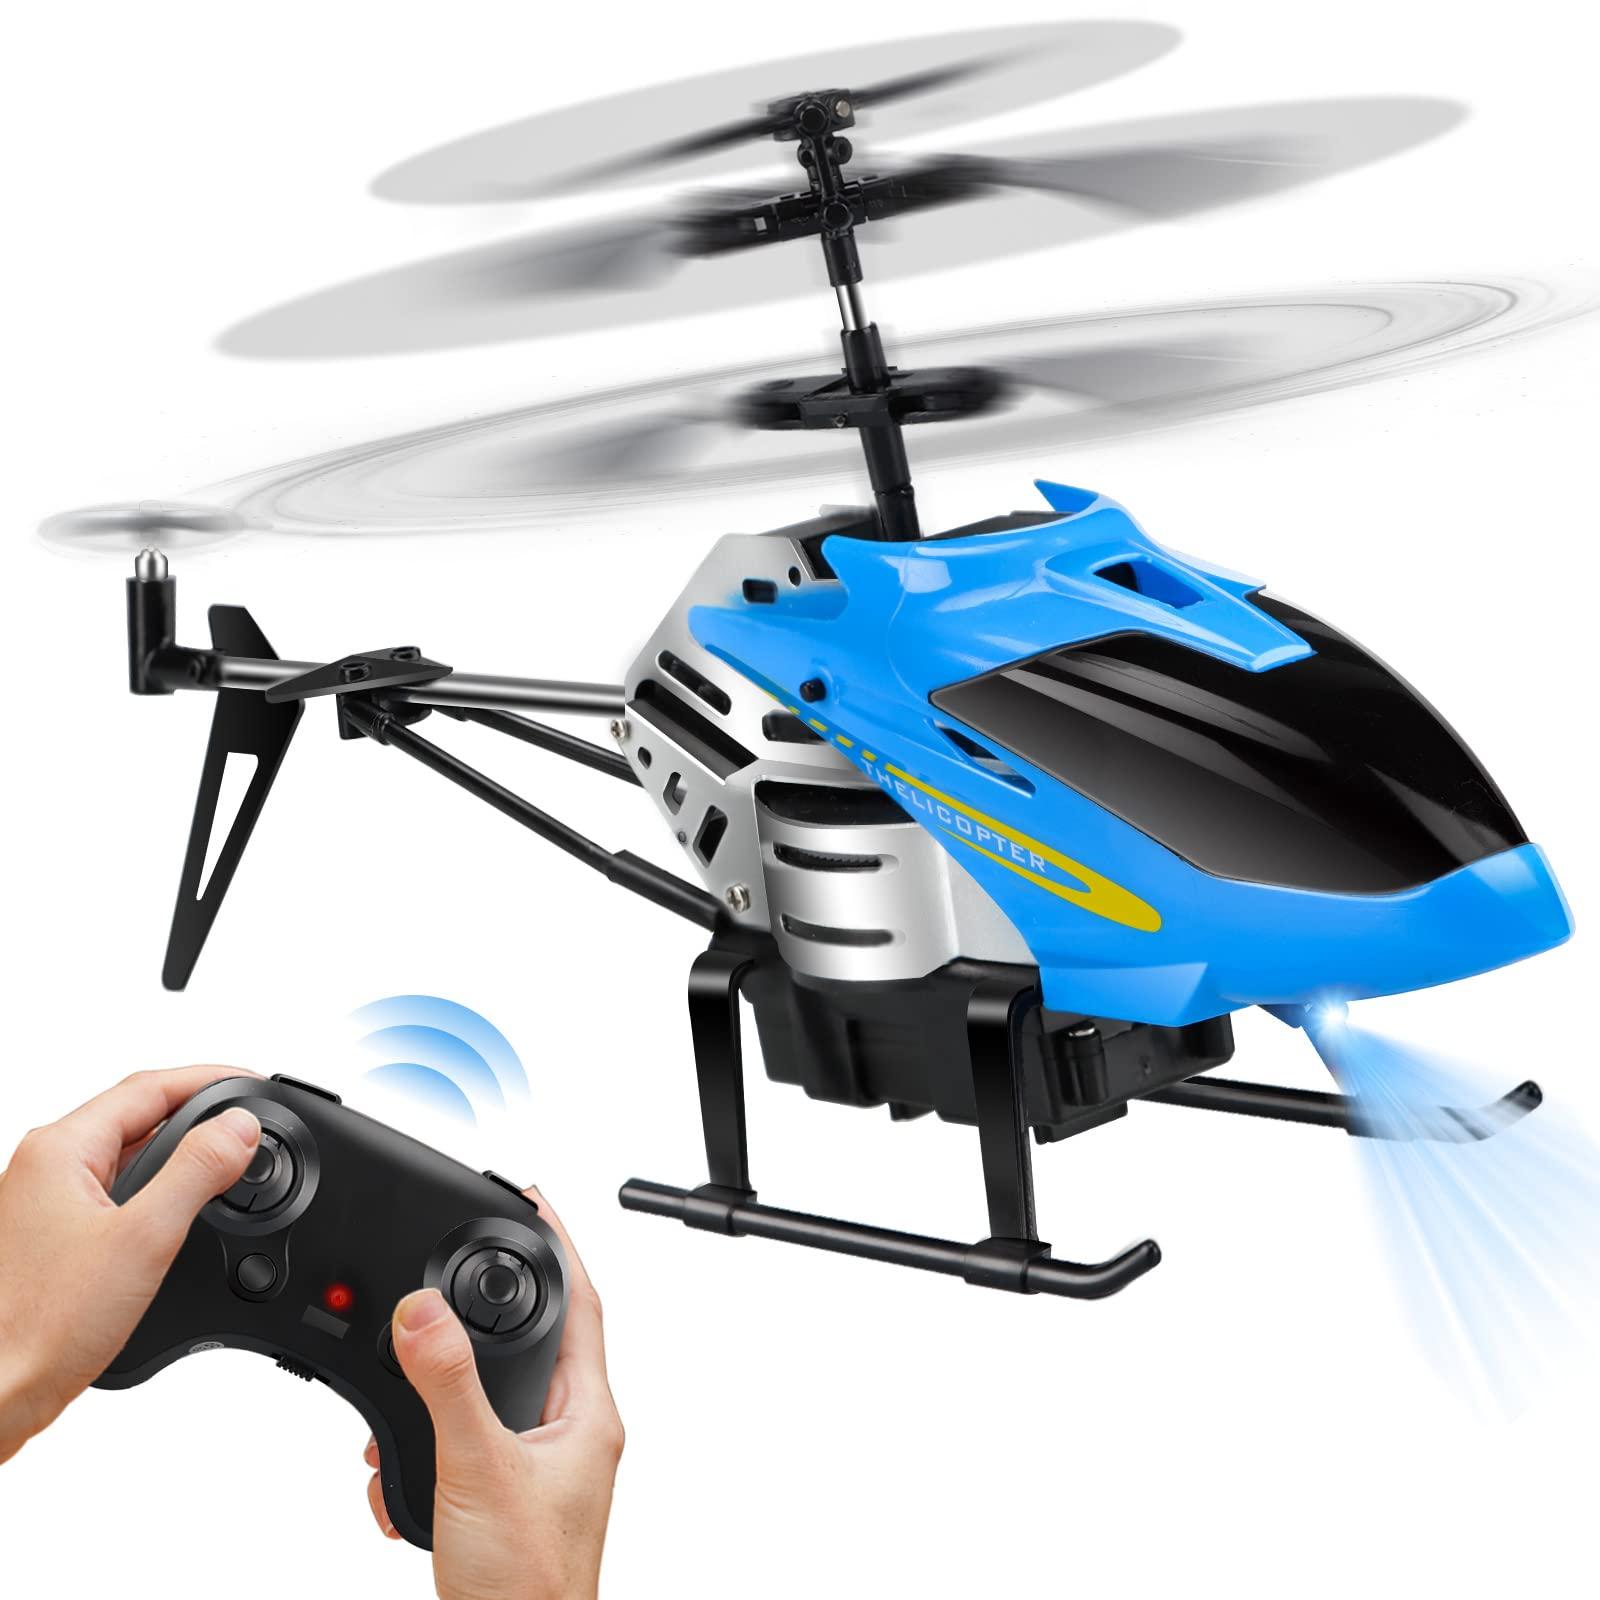 Helicopter Remote Control Helicopter Remote Control Helicopter: Accessories and upgrades for your remote control helicopter. 